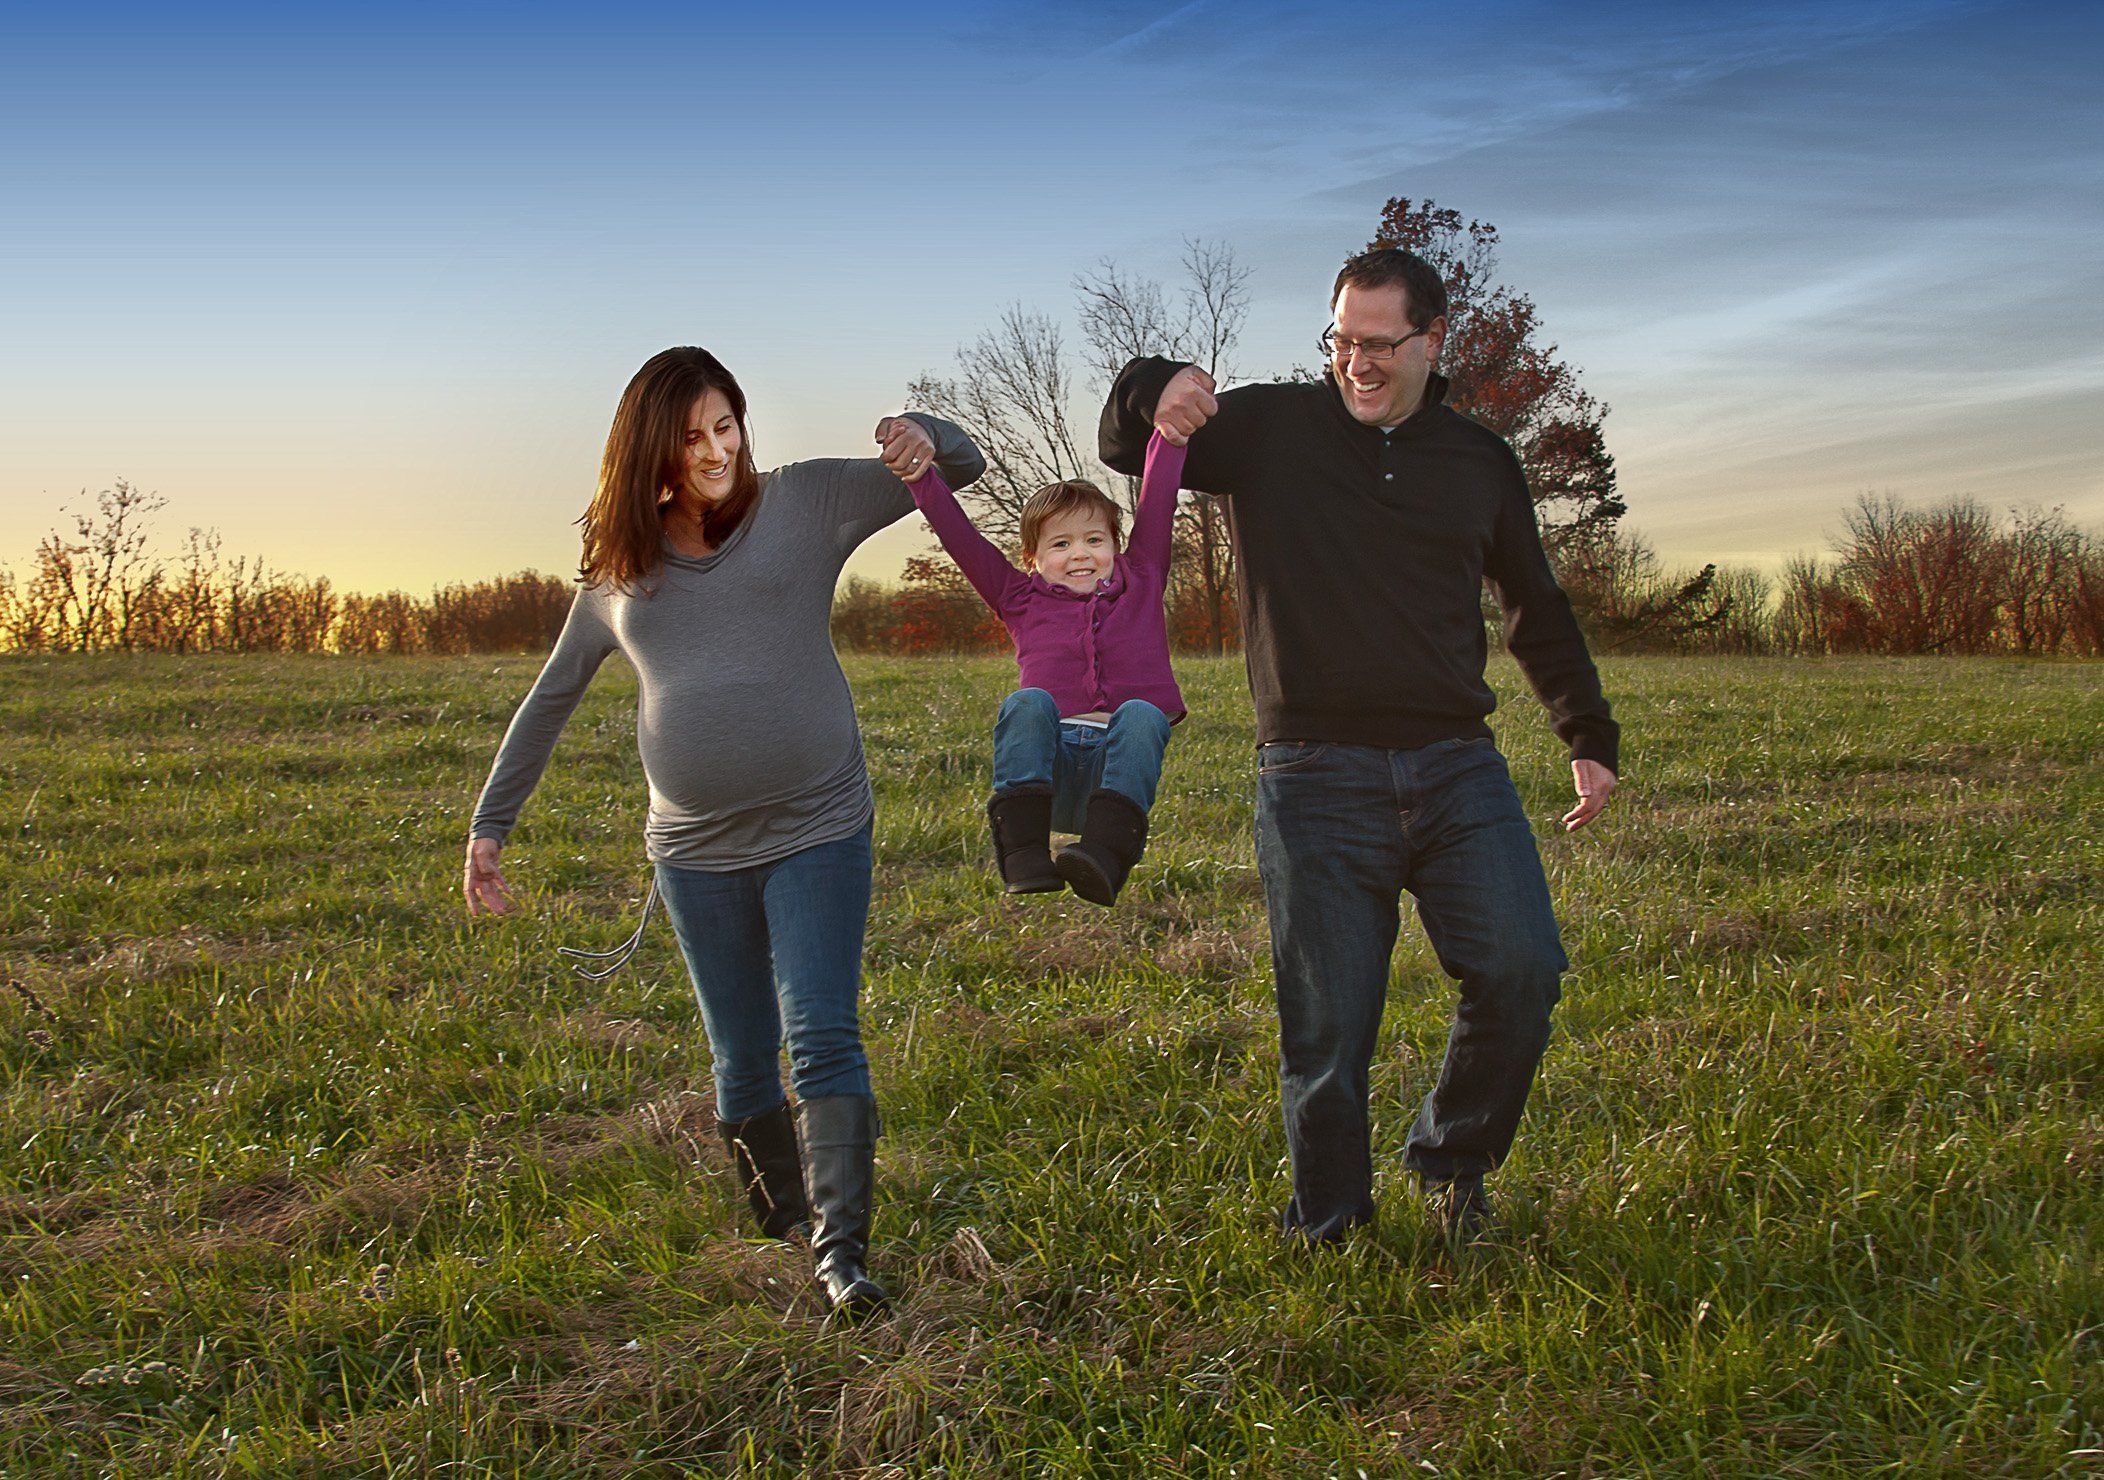 Pregnant Mom and Dad swinging 2 year old between them while walking at sunset